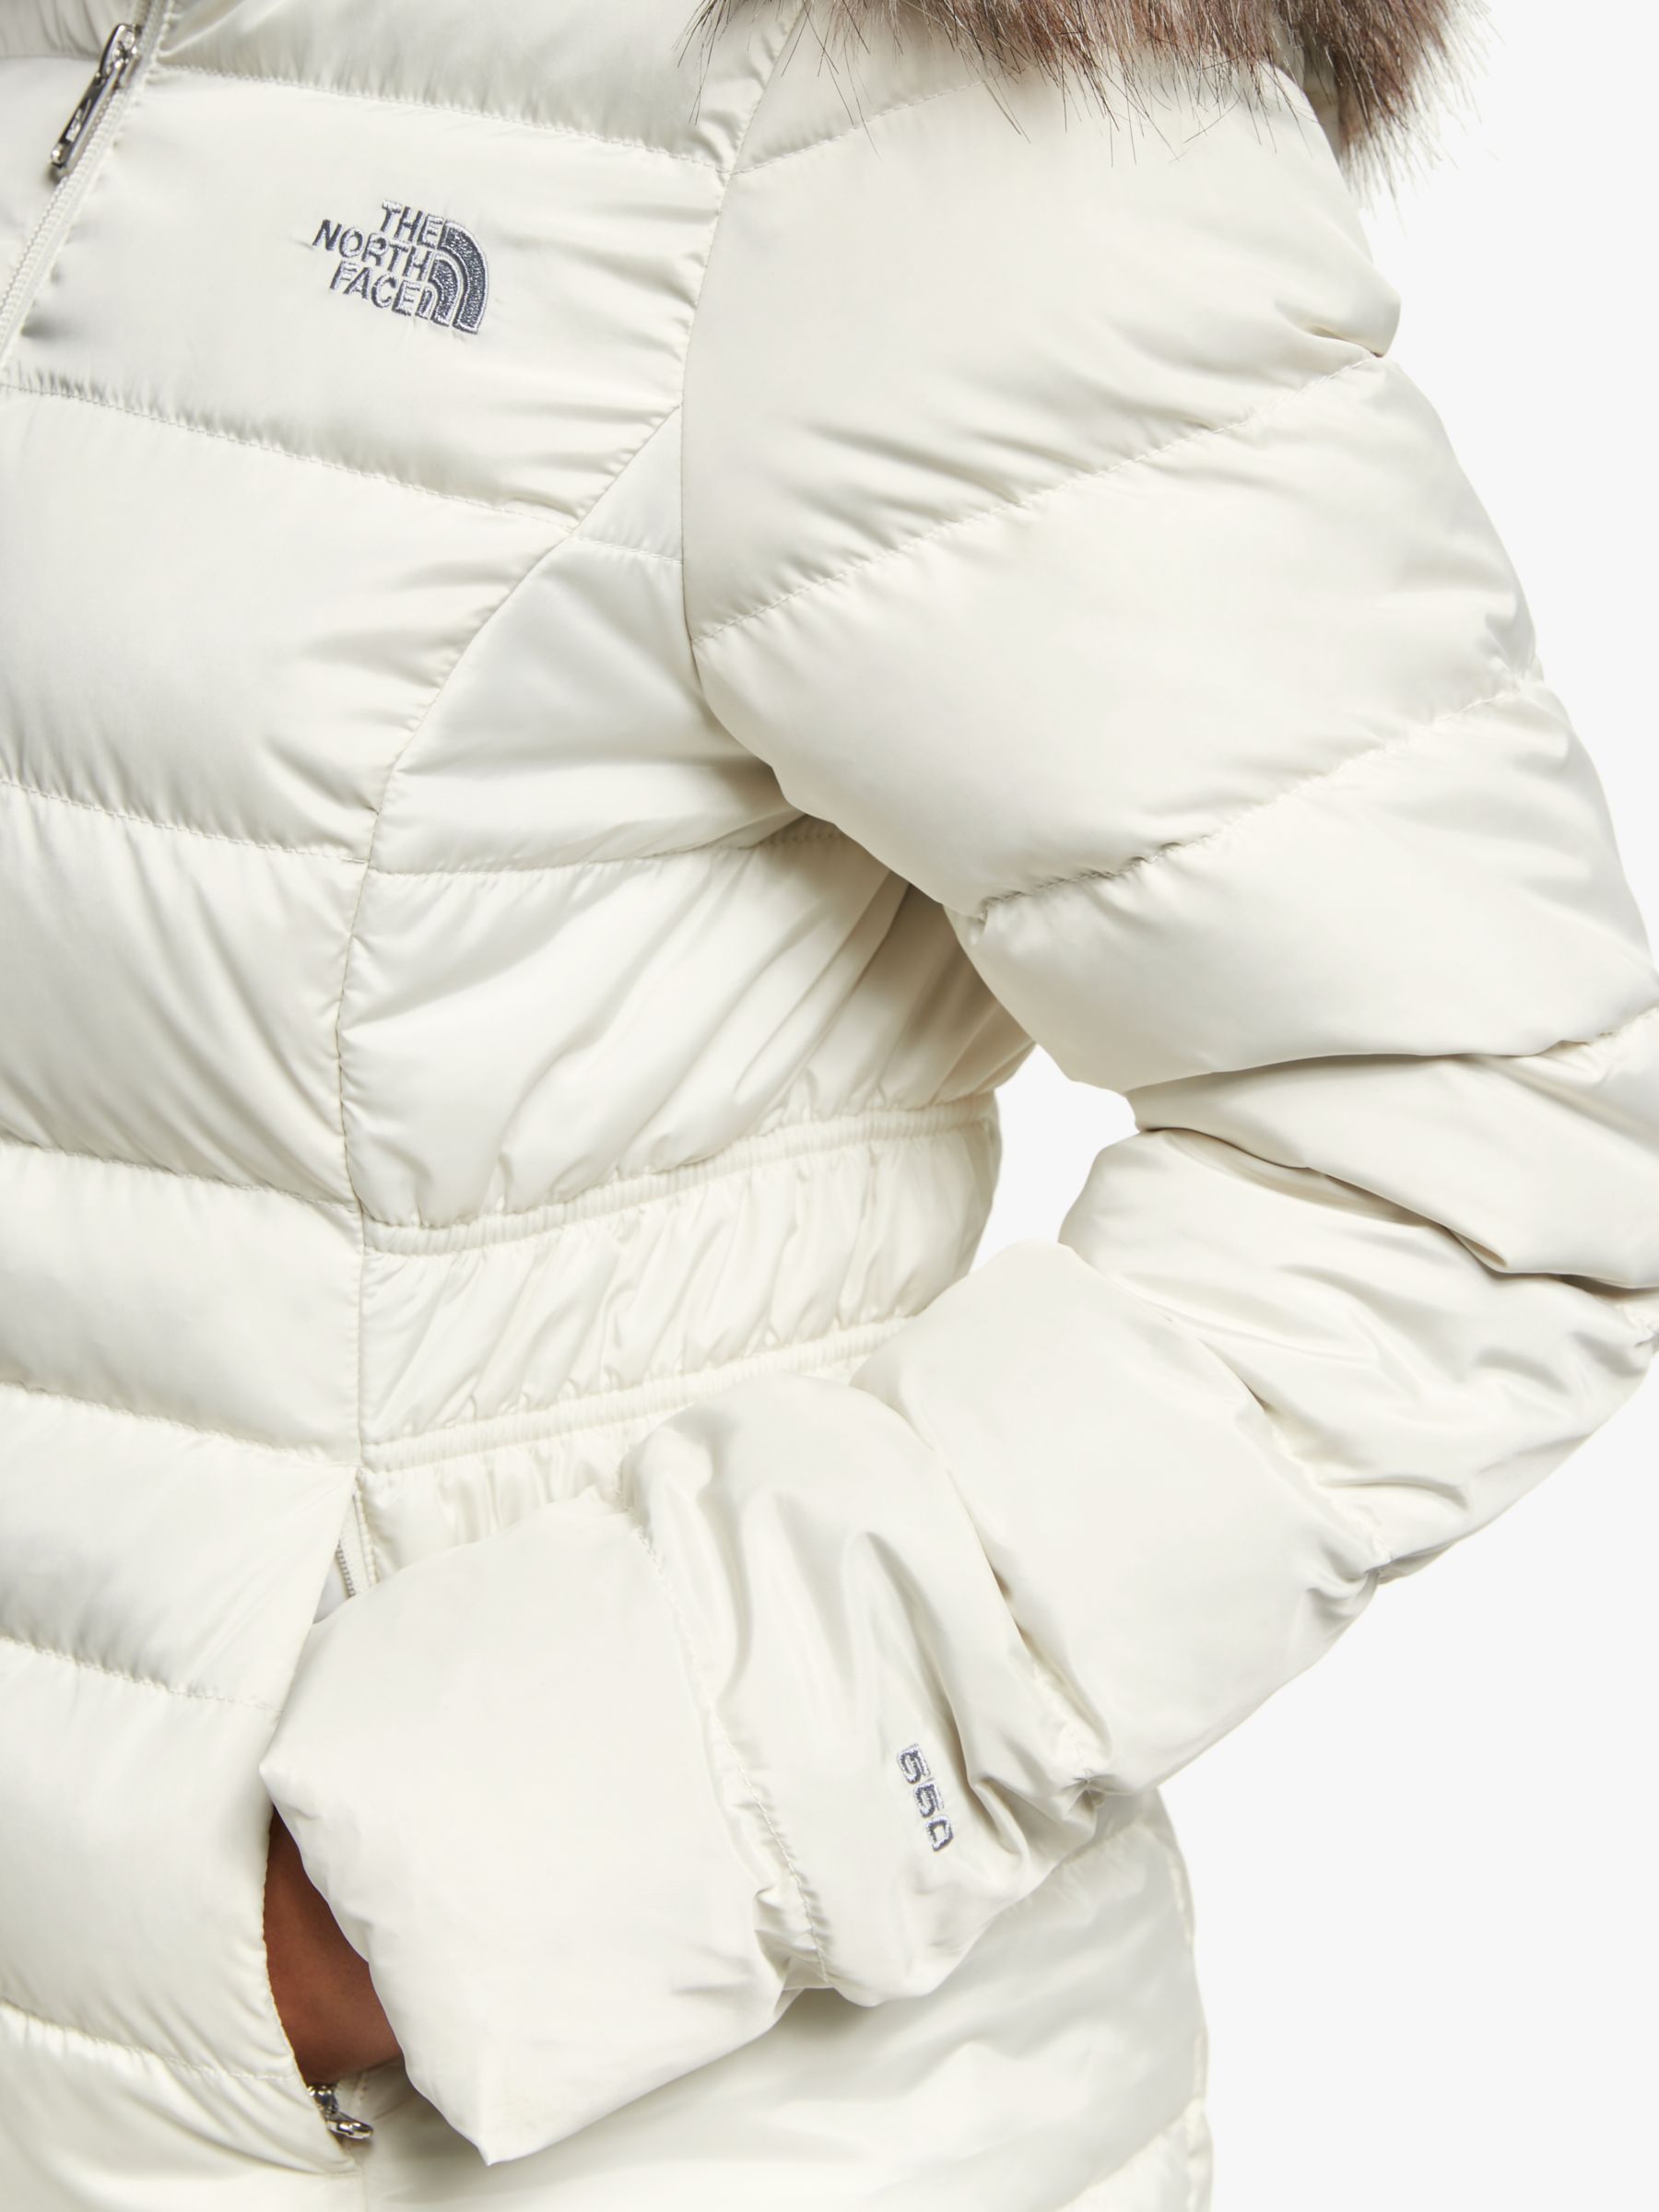 north face white jacket womens